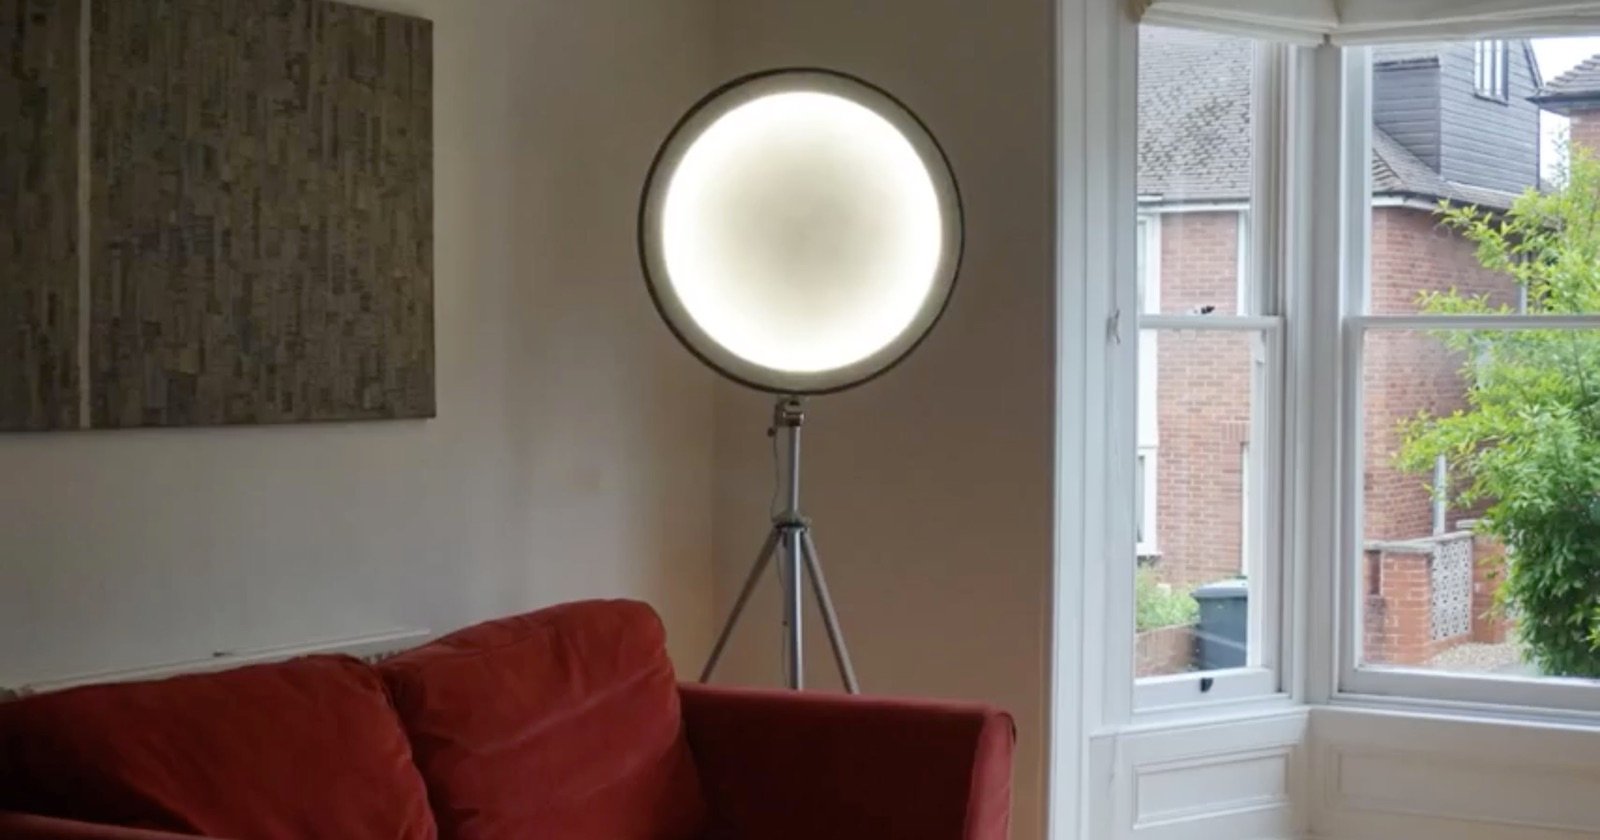 How to Make a DIY Softbox from a Bicycle Wheel and Some Fabric